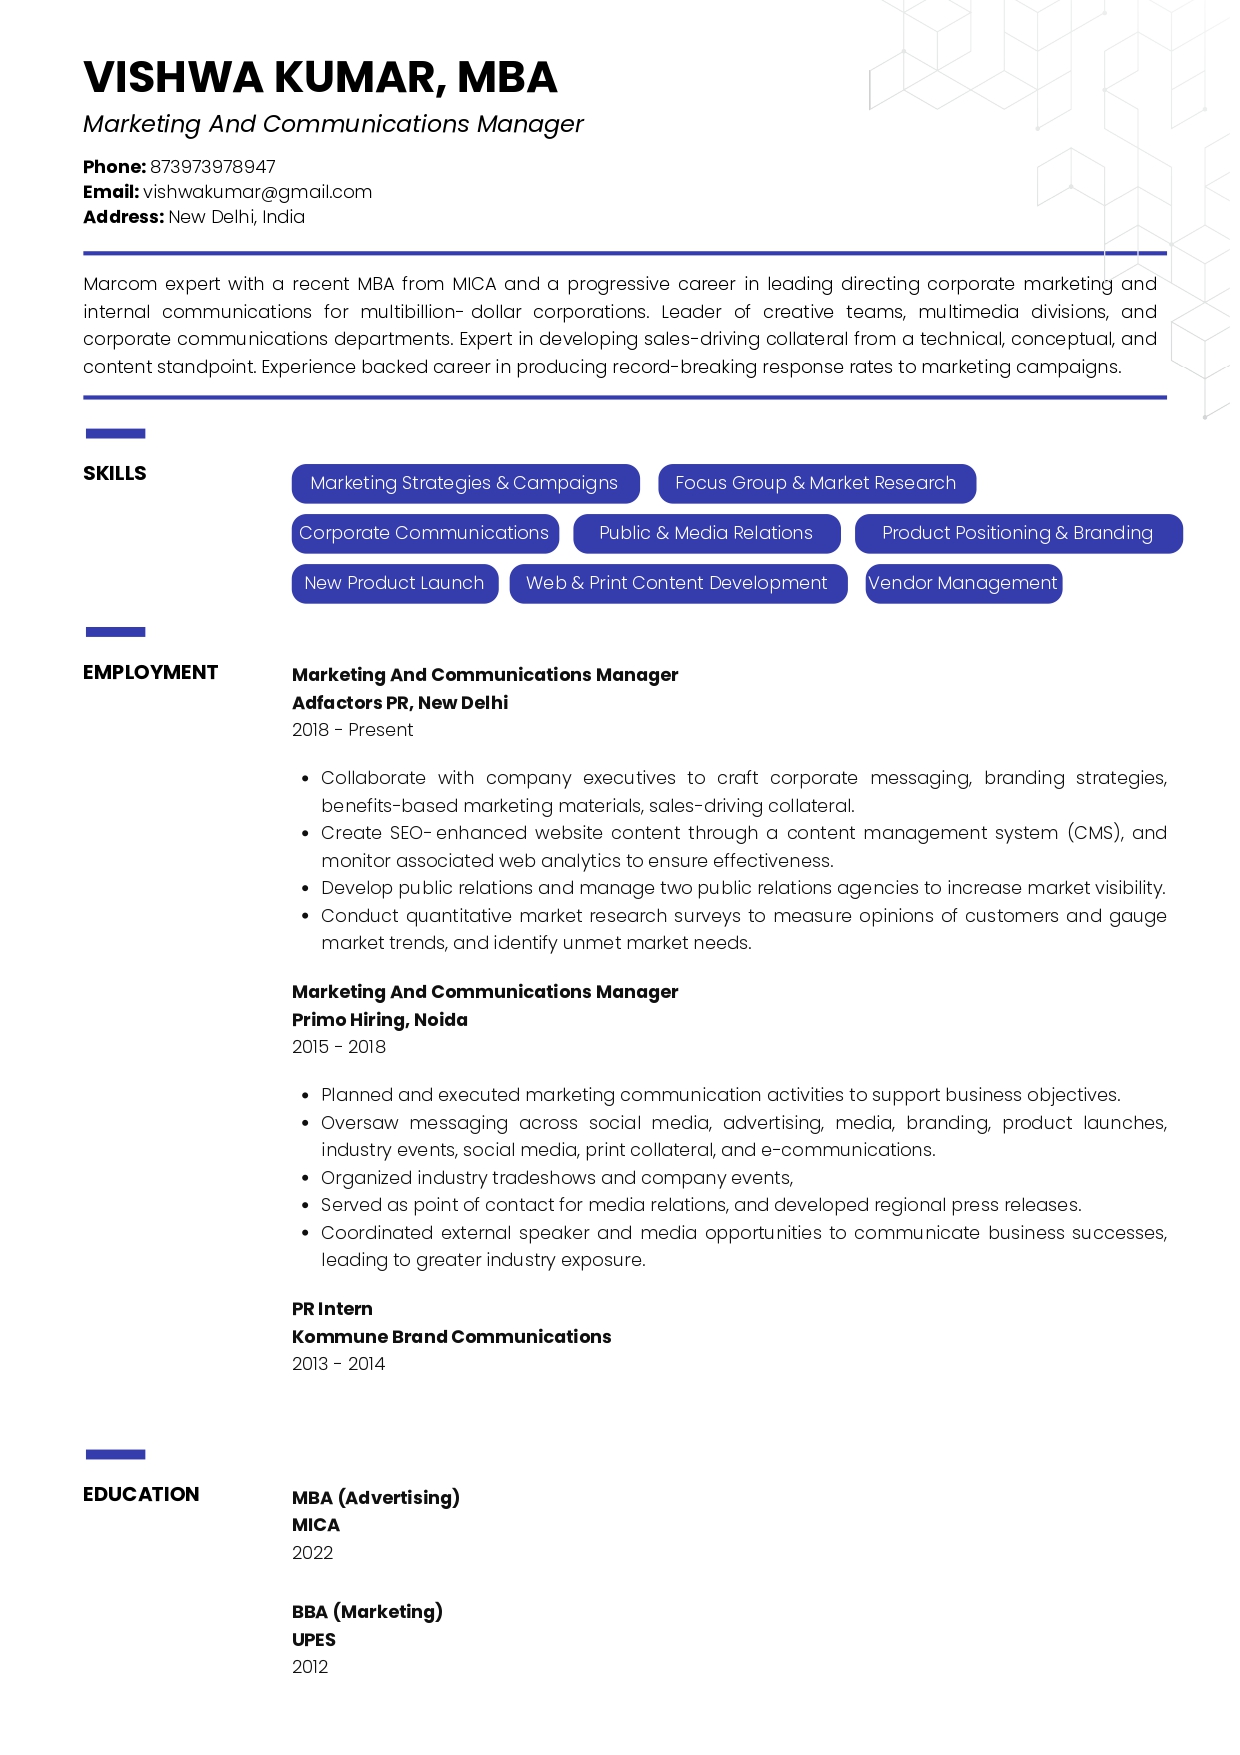 Resume of Marketing and Communications Manager